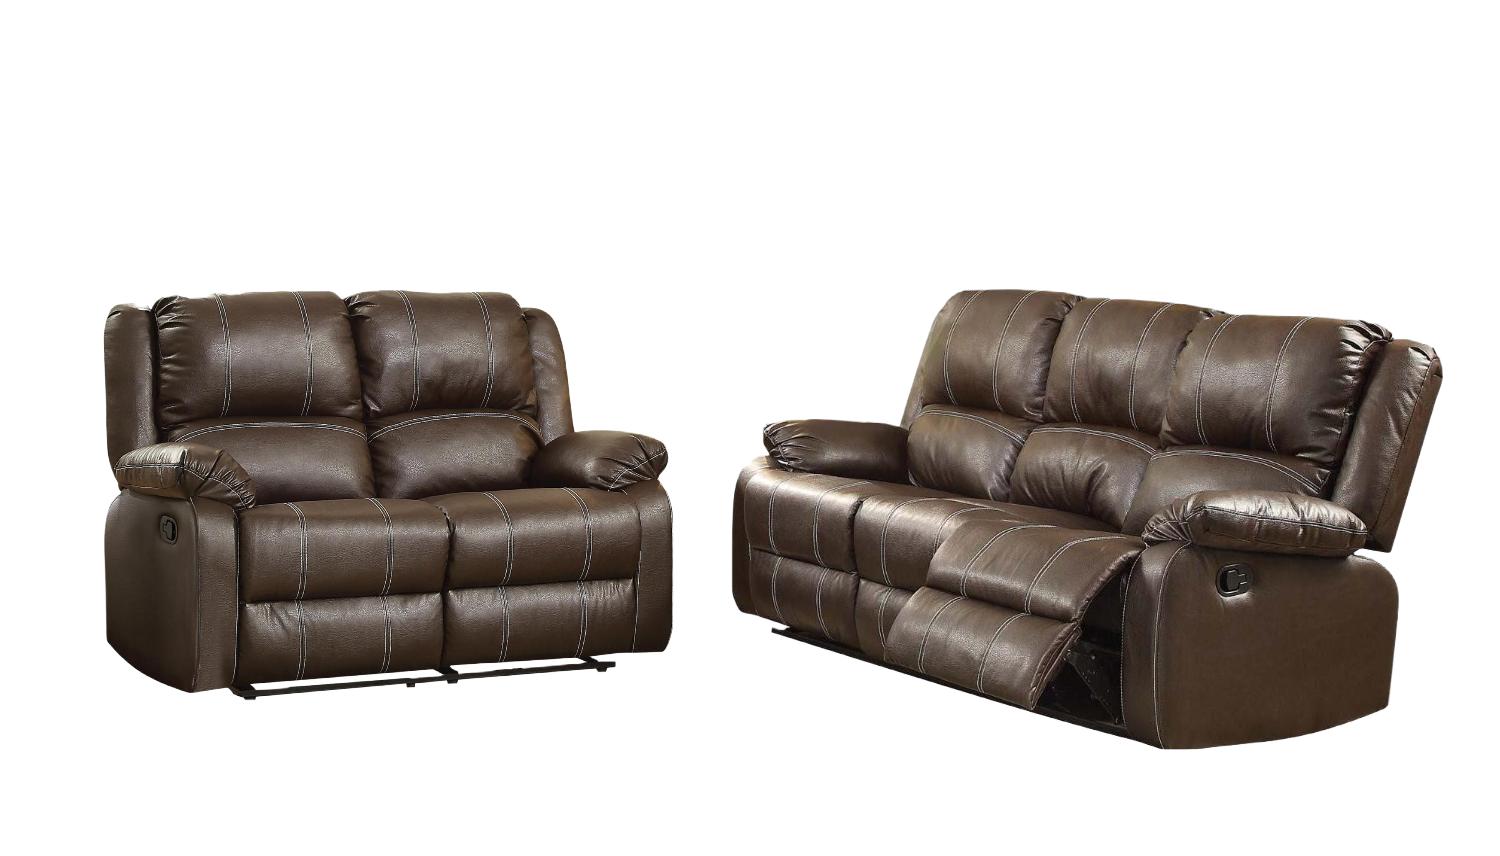 Modern Sofa and Loveseat Set Zuriel-BR-52280 52280-2pcs in Brown Faux Leather